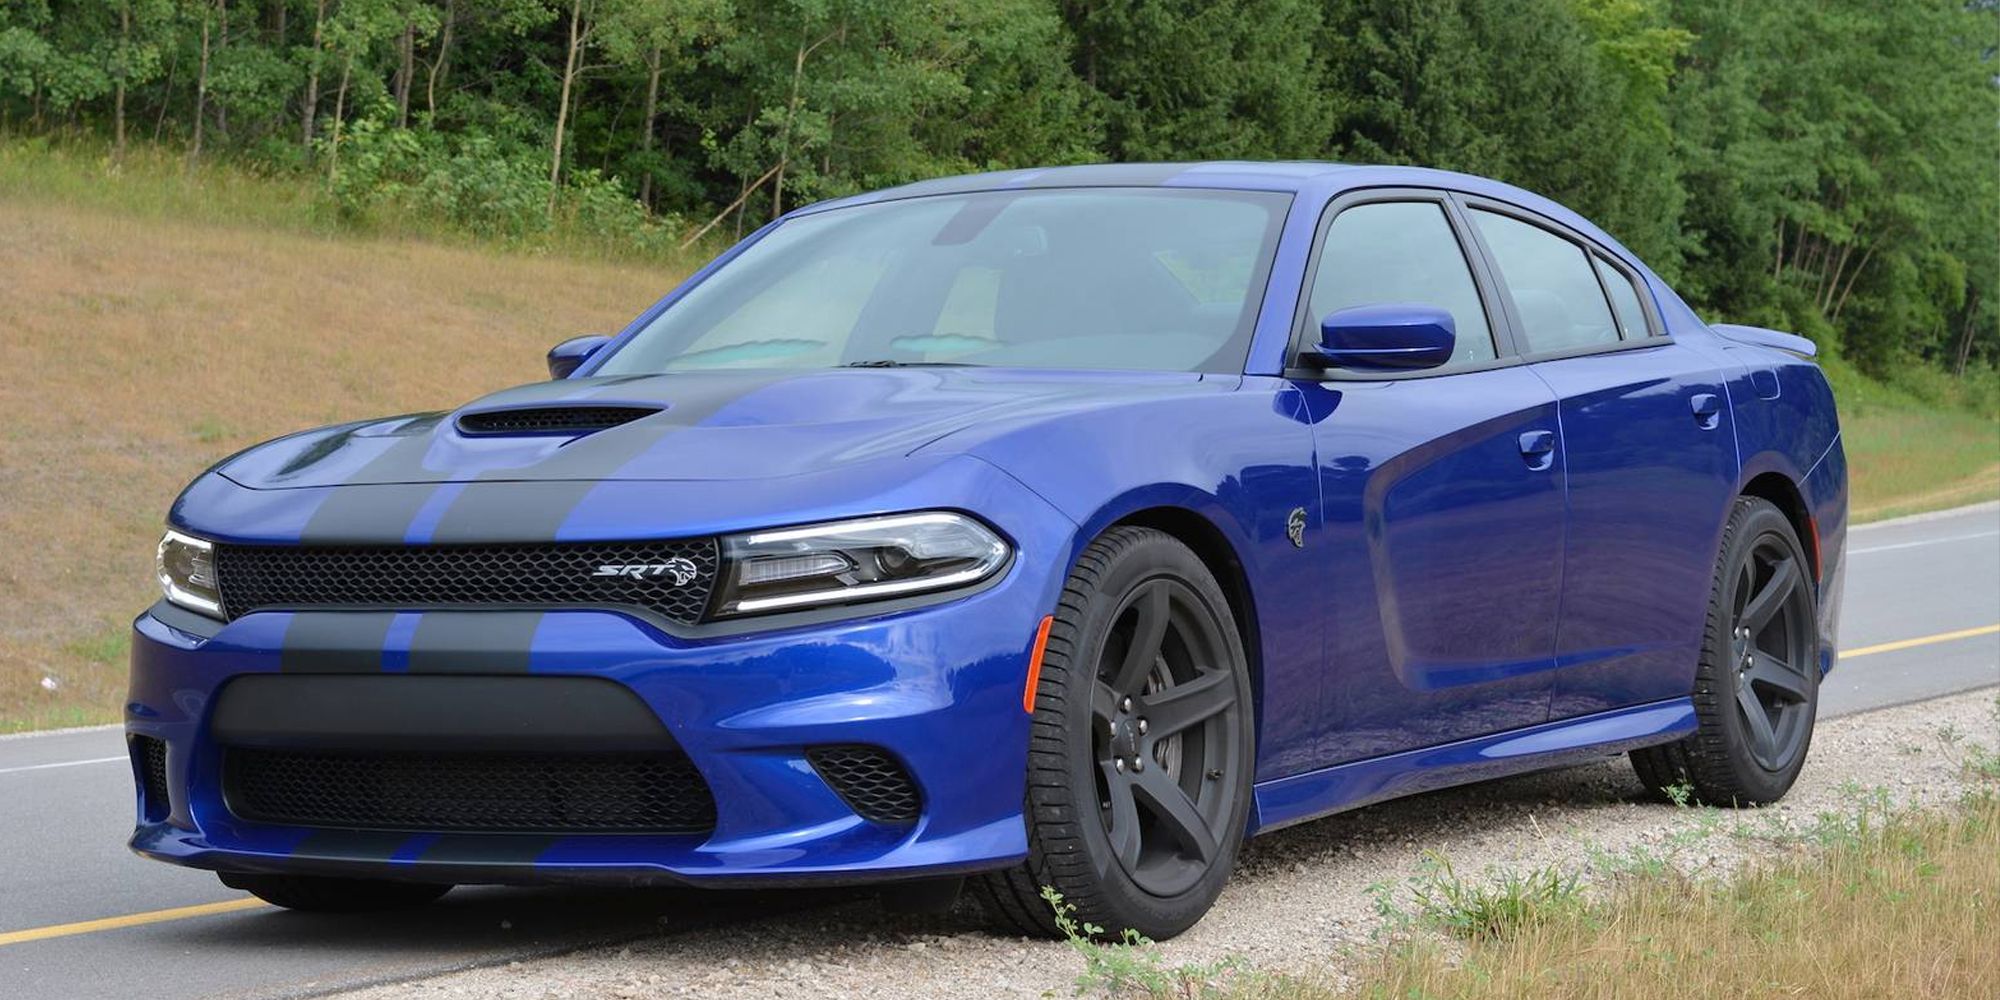 A blue Charger Hellcat with black stripes